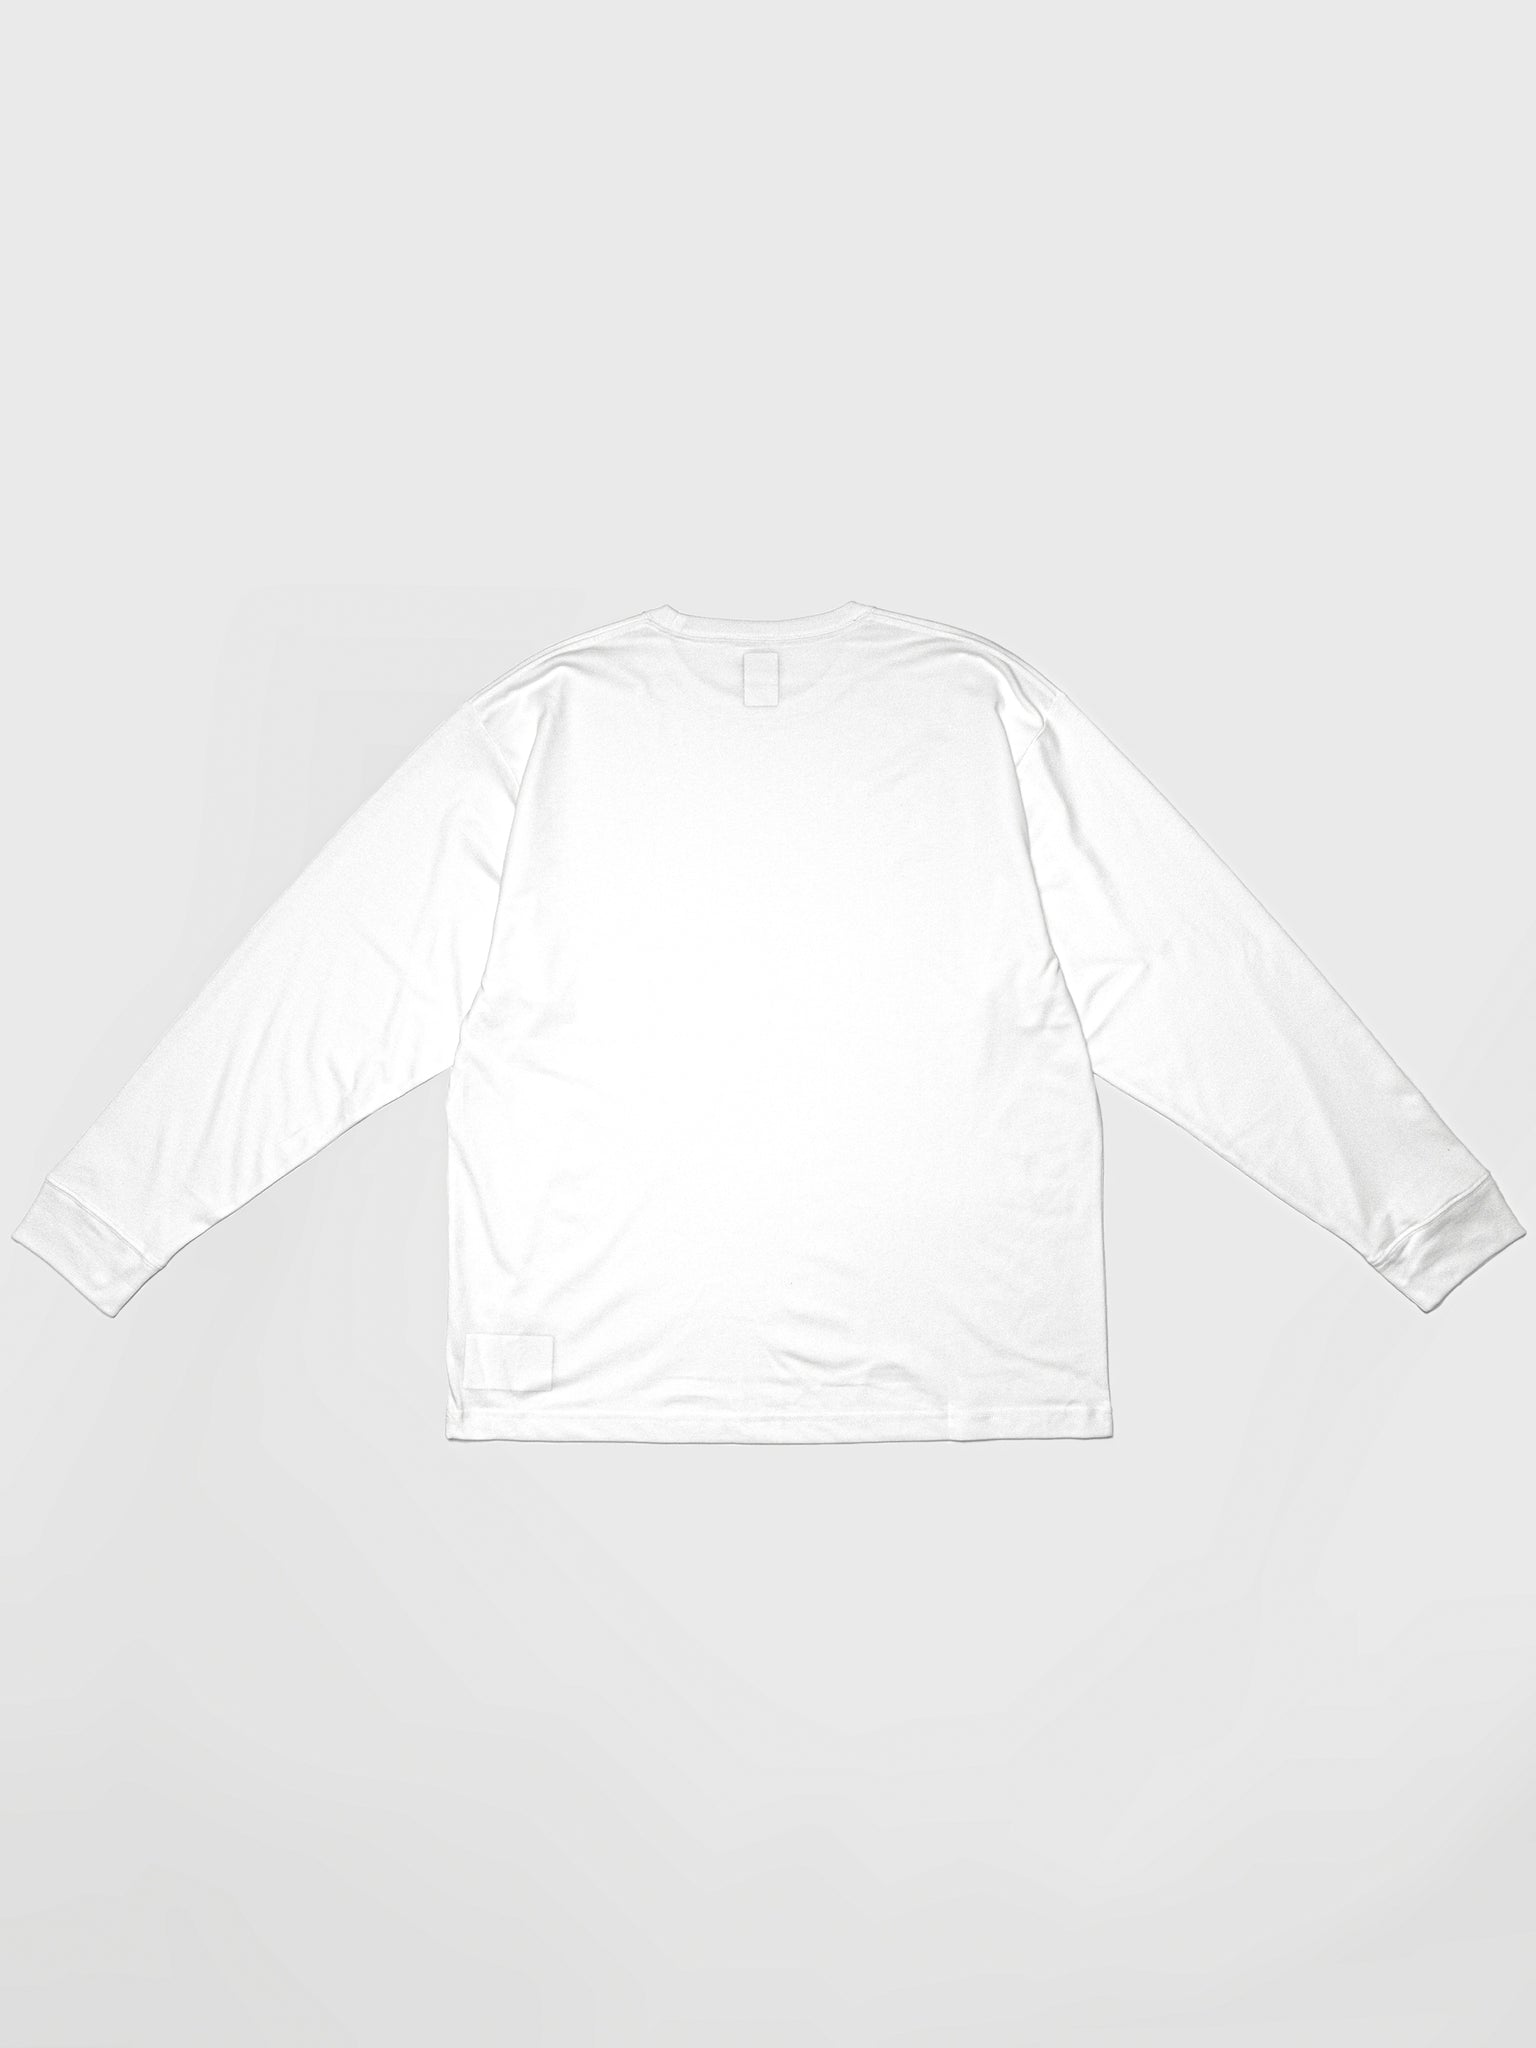 Relaxed Fit Long Sleeve White - v2